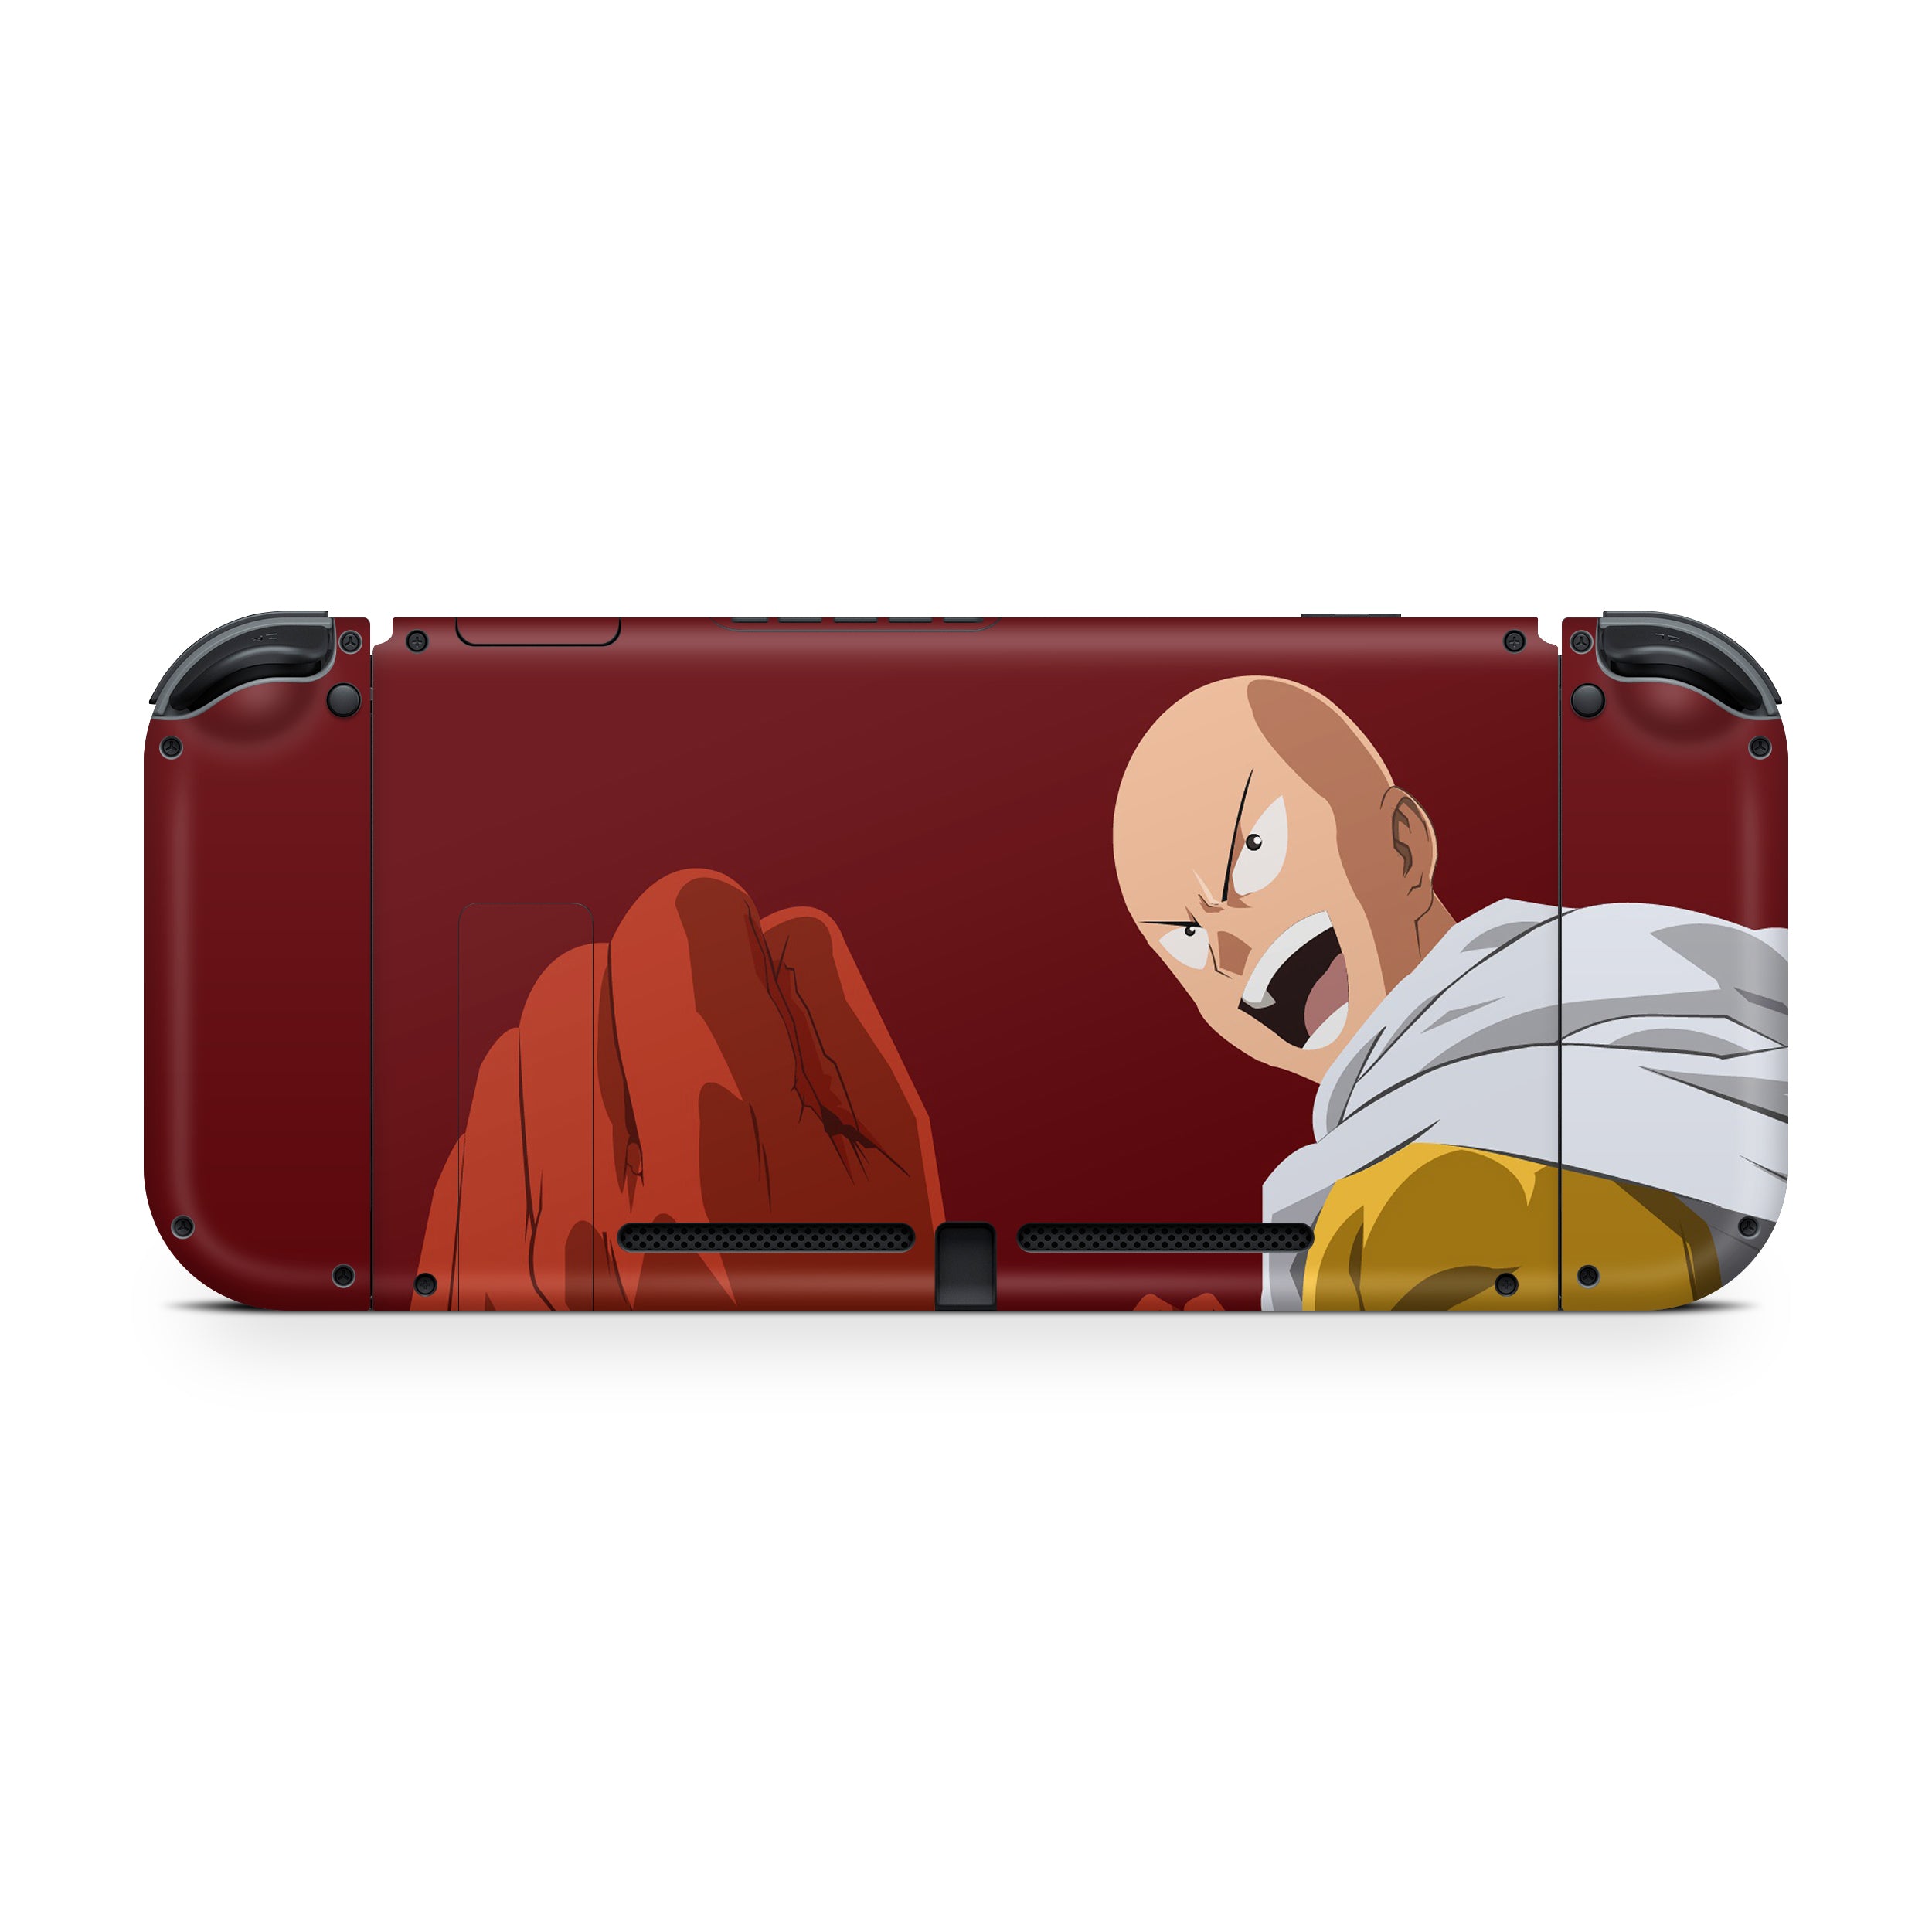 A video game skin featuring a One Punch Man Saitama design for the Nintendo Switch.